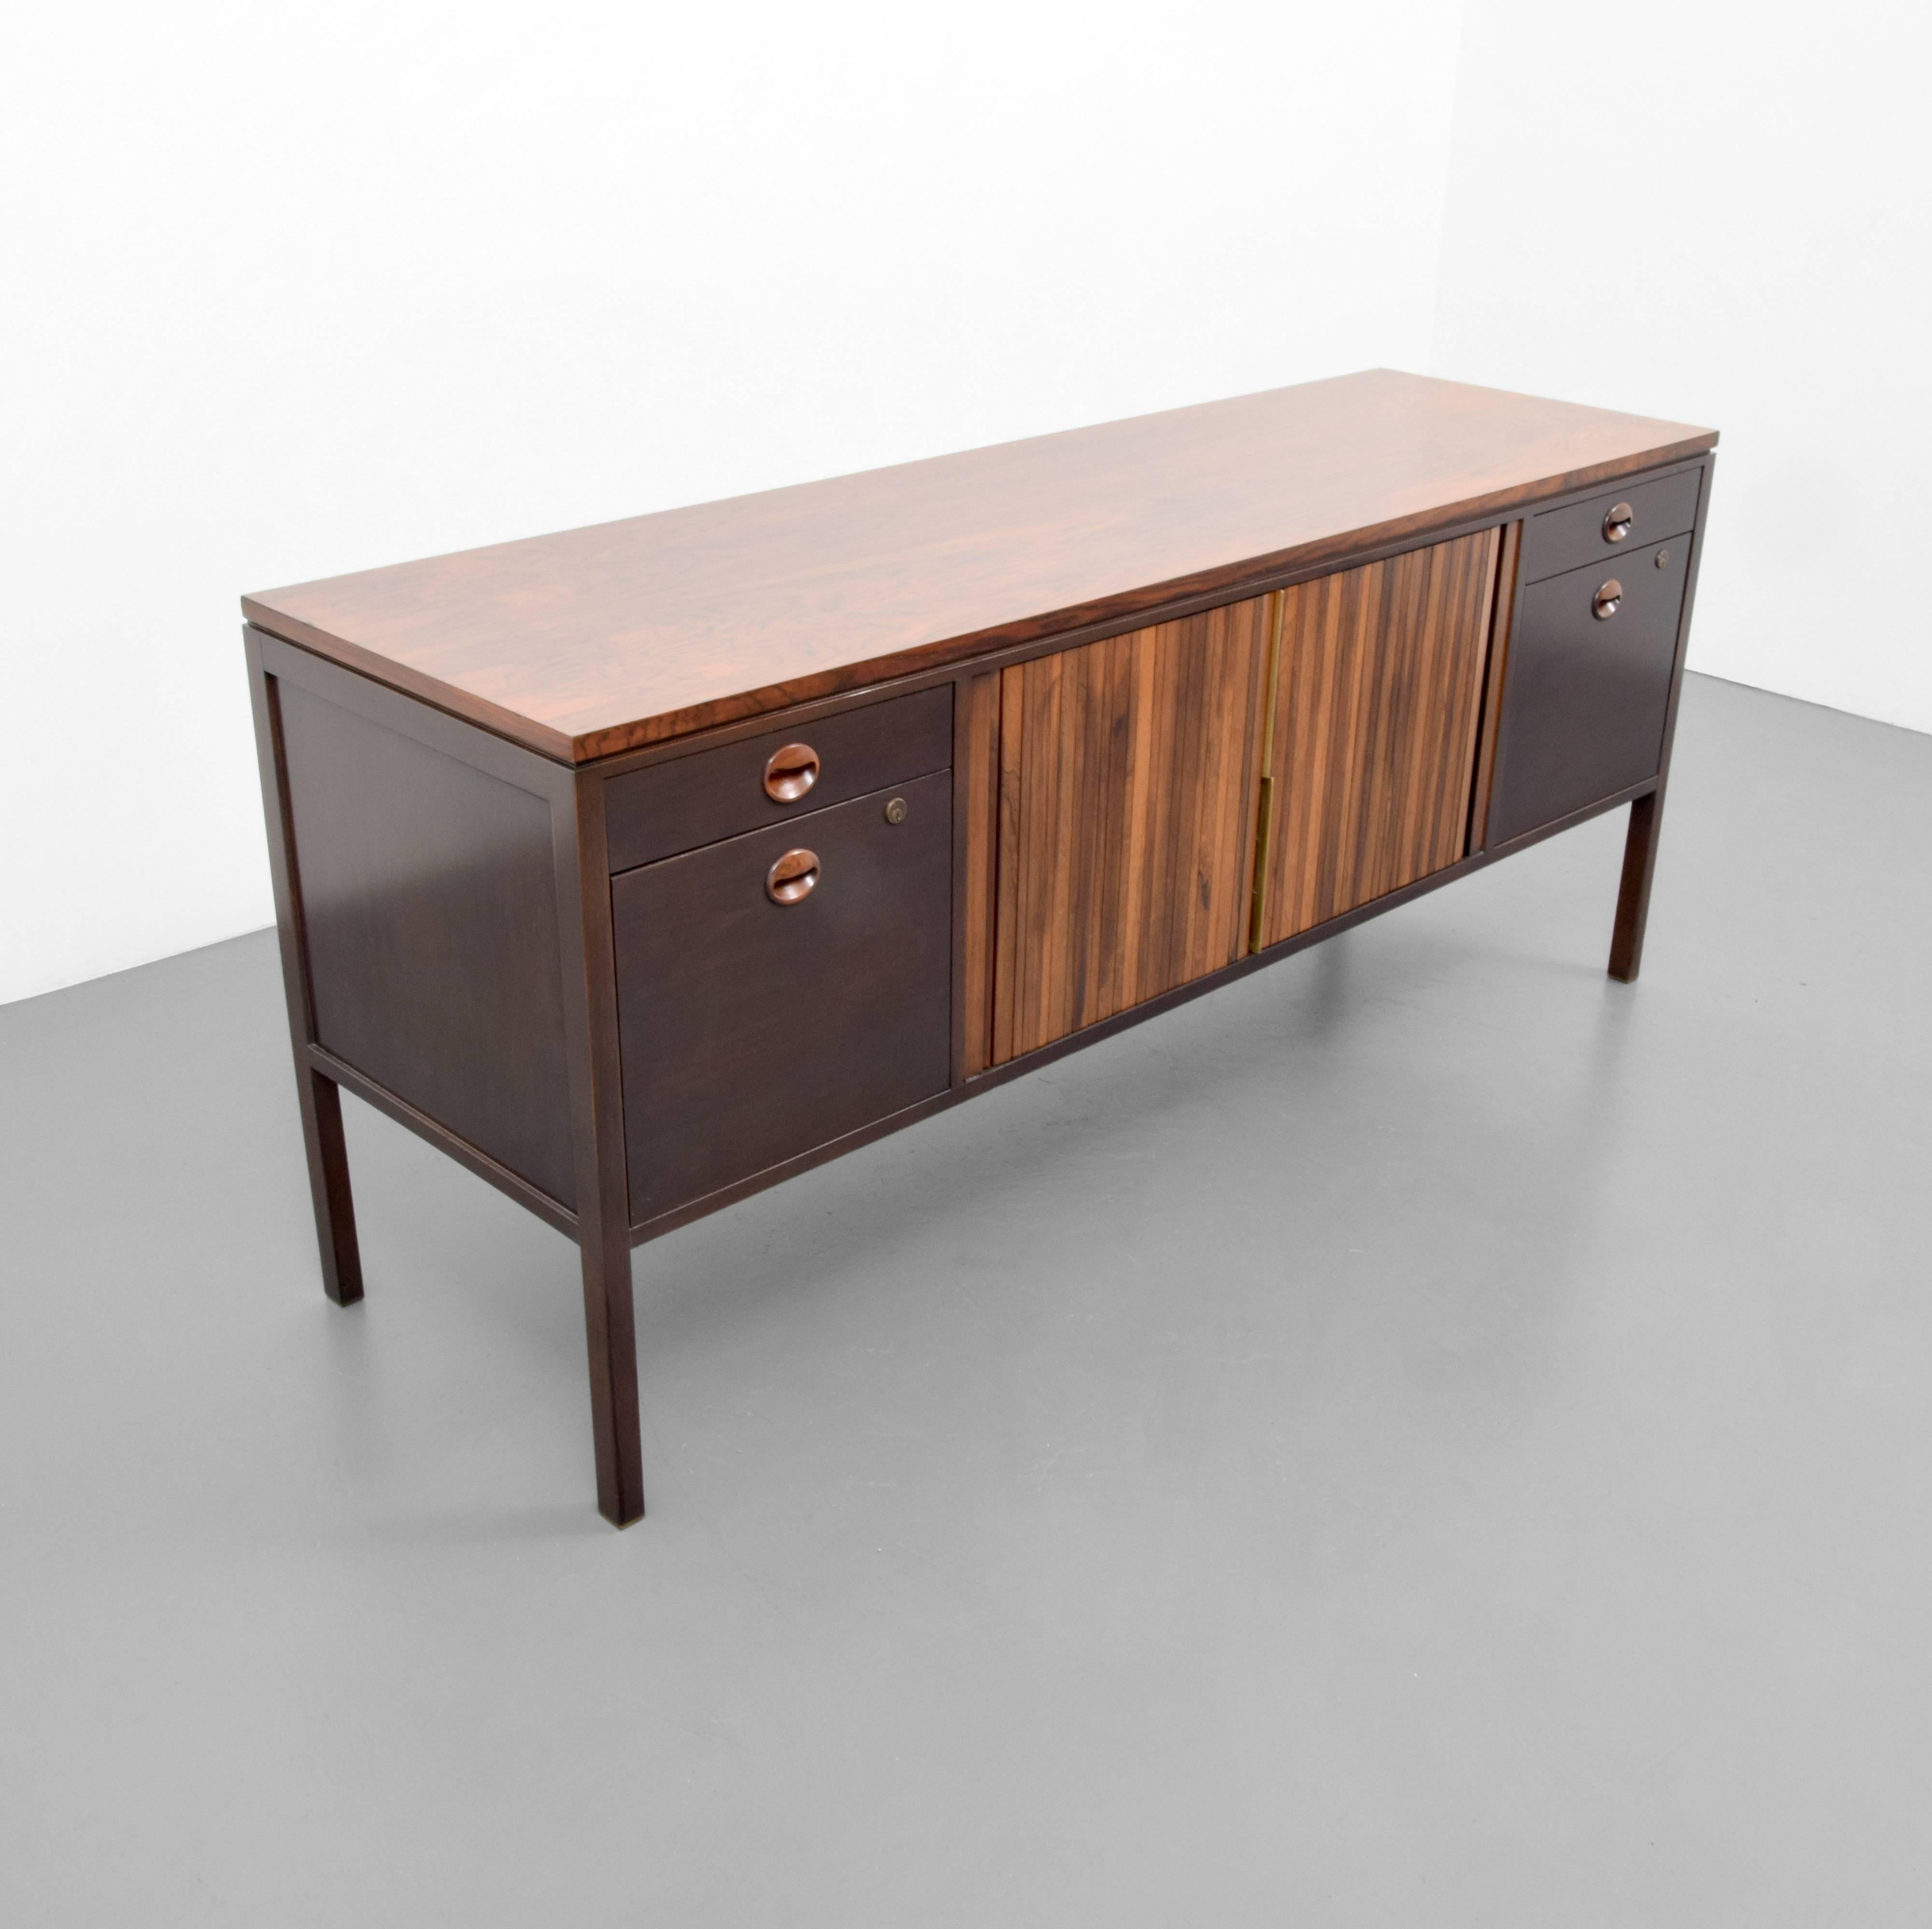 Cabinet by Edward Wormley for Dunbar. Cabinet has two drawers, two file drawers and two tambour doors revealing a shelf.

Cabinet is marked. 

Edward Wormley's furniture designs utilized quality materials and were understated and well-made,